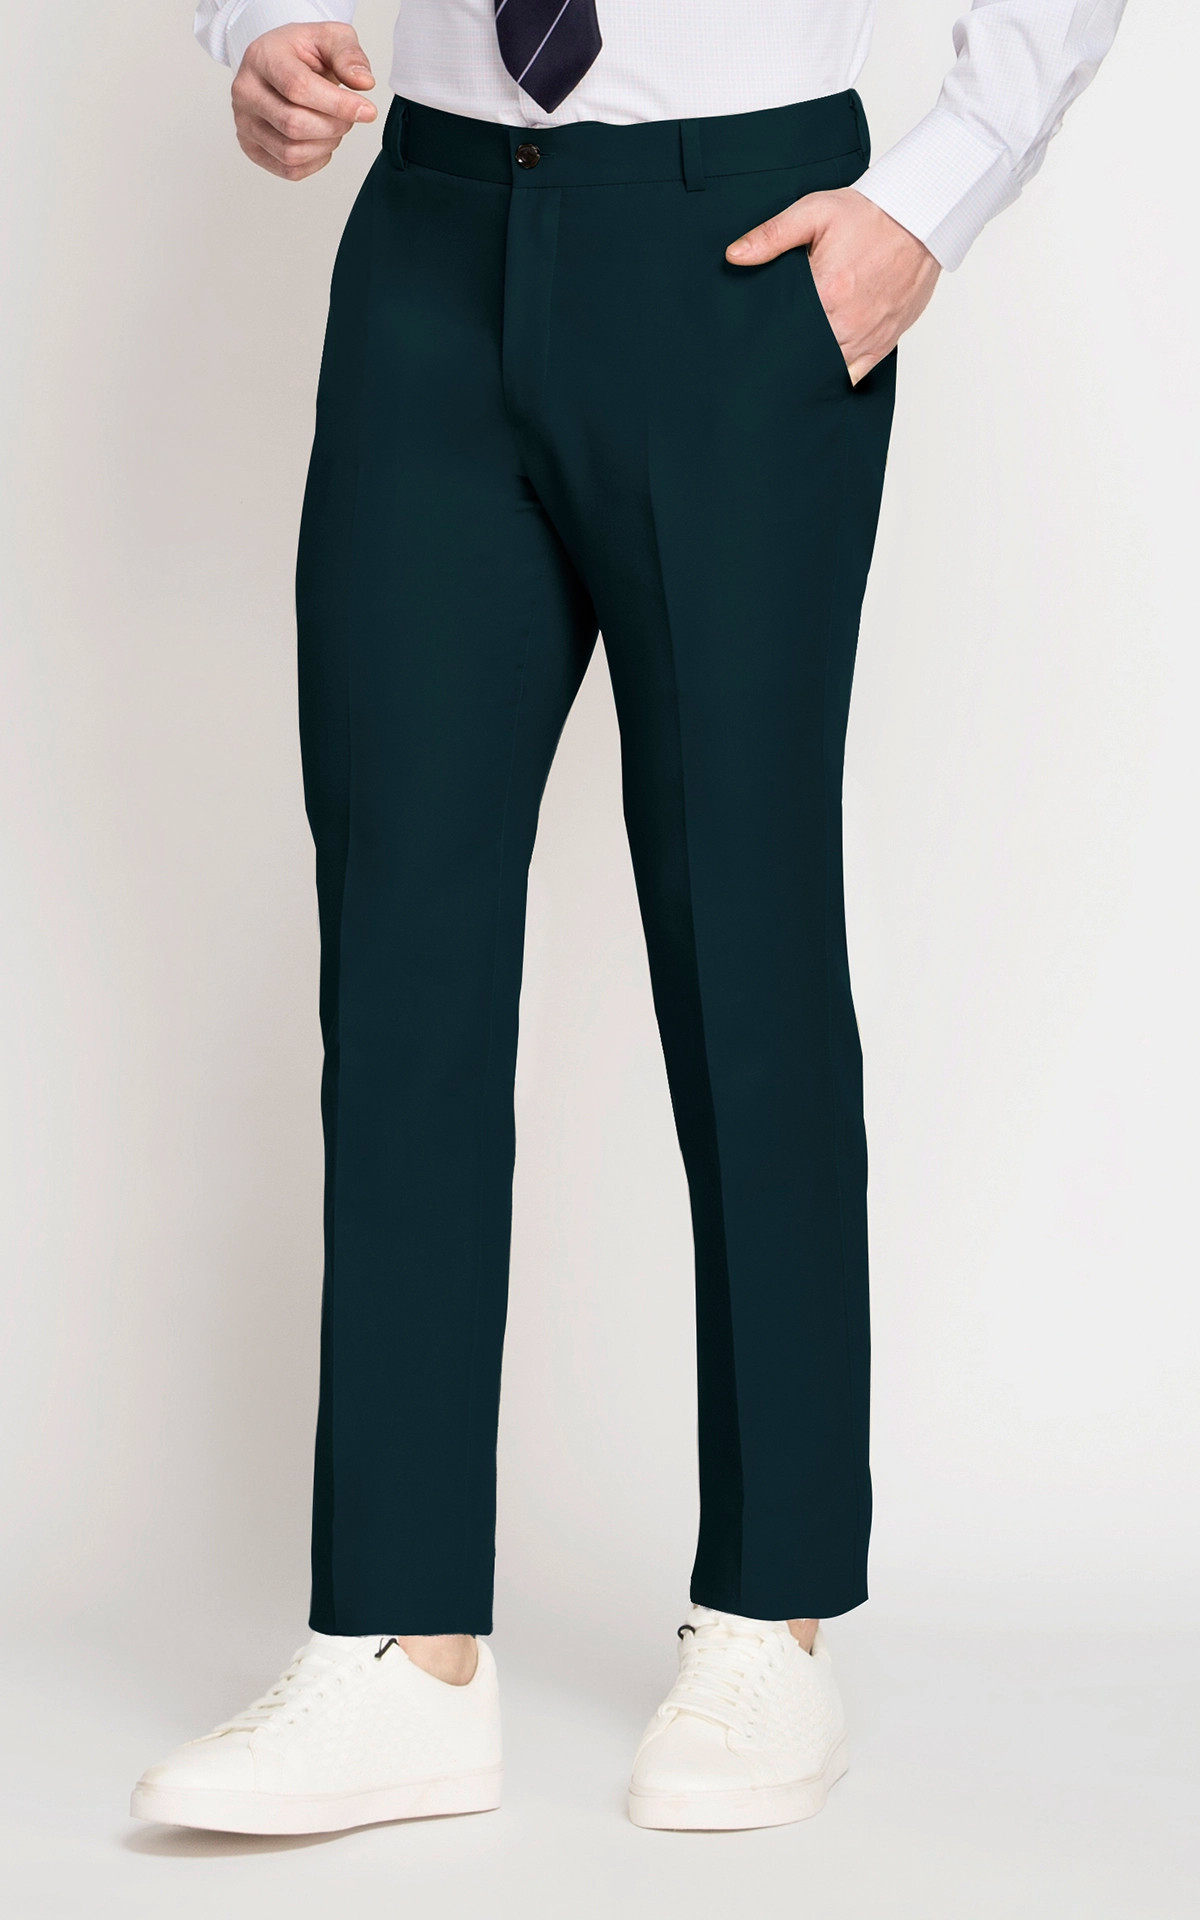 Buy Stylish Dark Green Trousers Collection At Best Prices Online